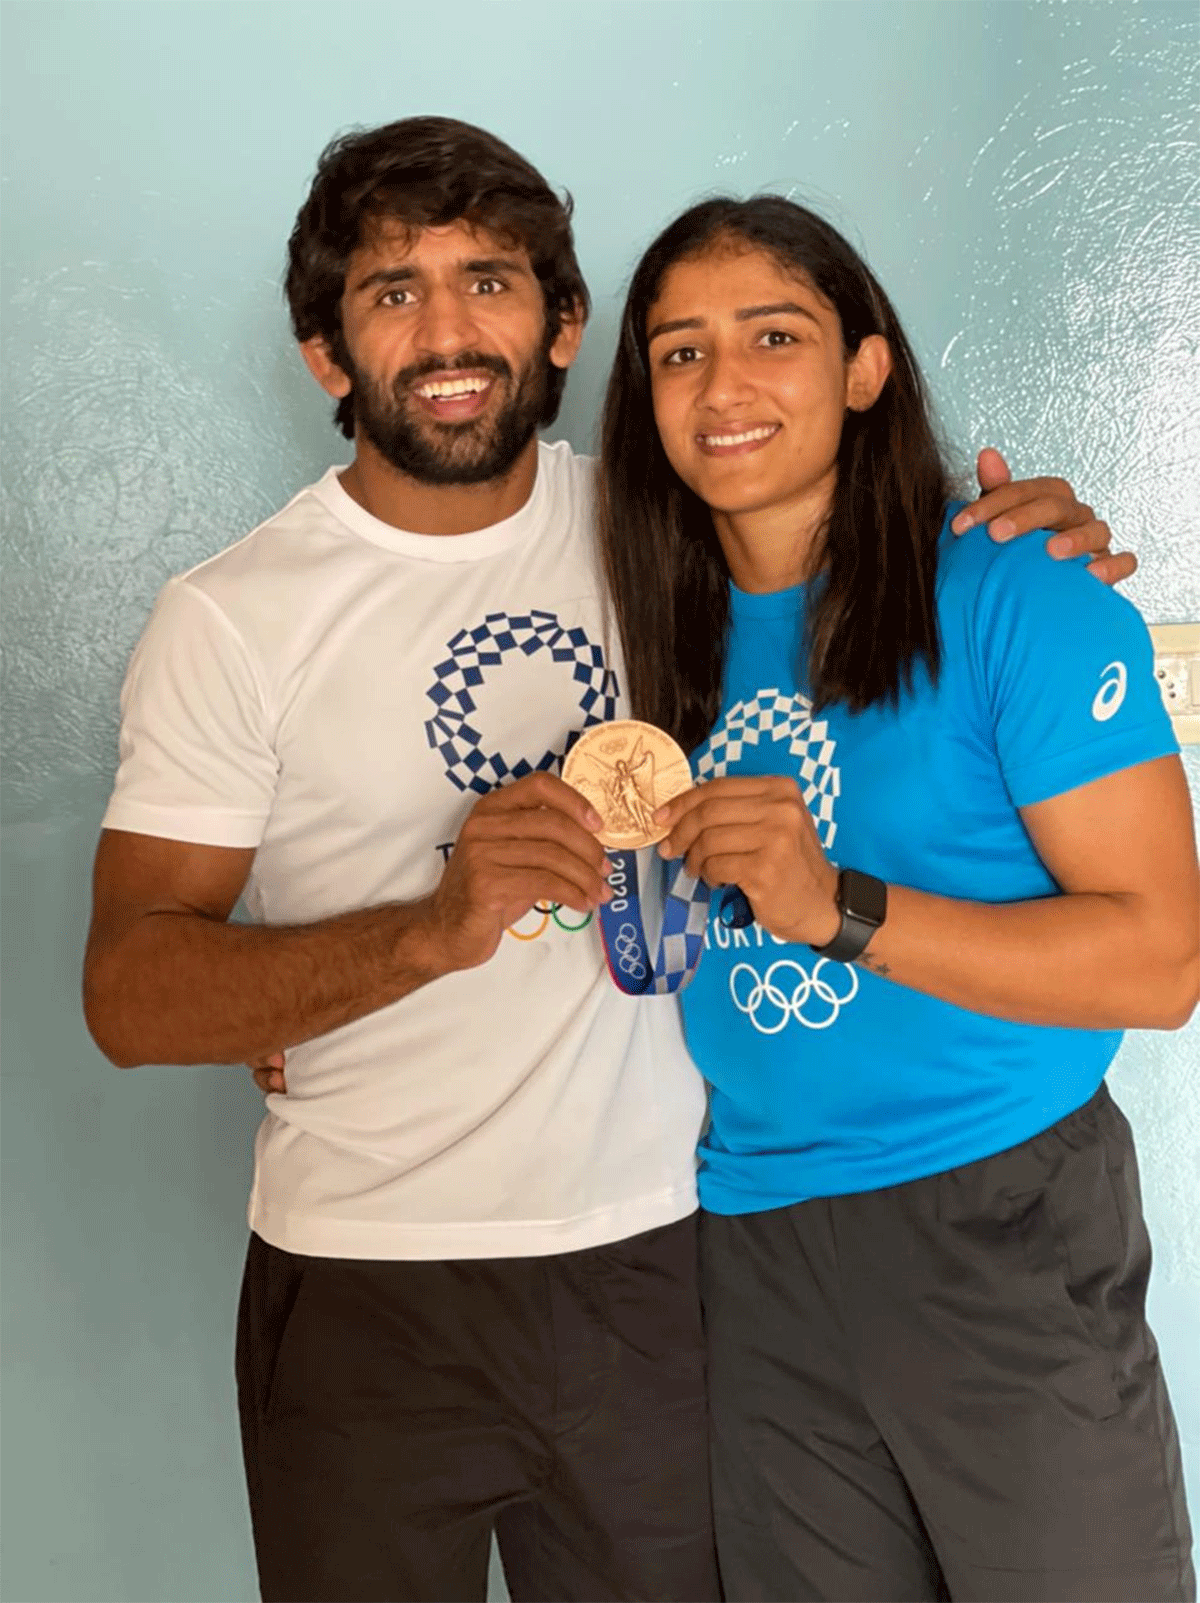 Tokyo Olympics bronze medalist Bajrang Punia shared this photograph on his Twitter page 